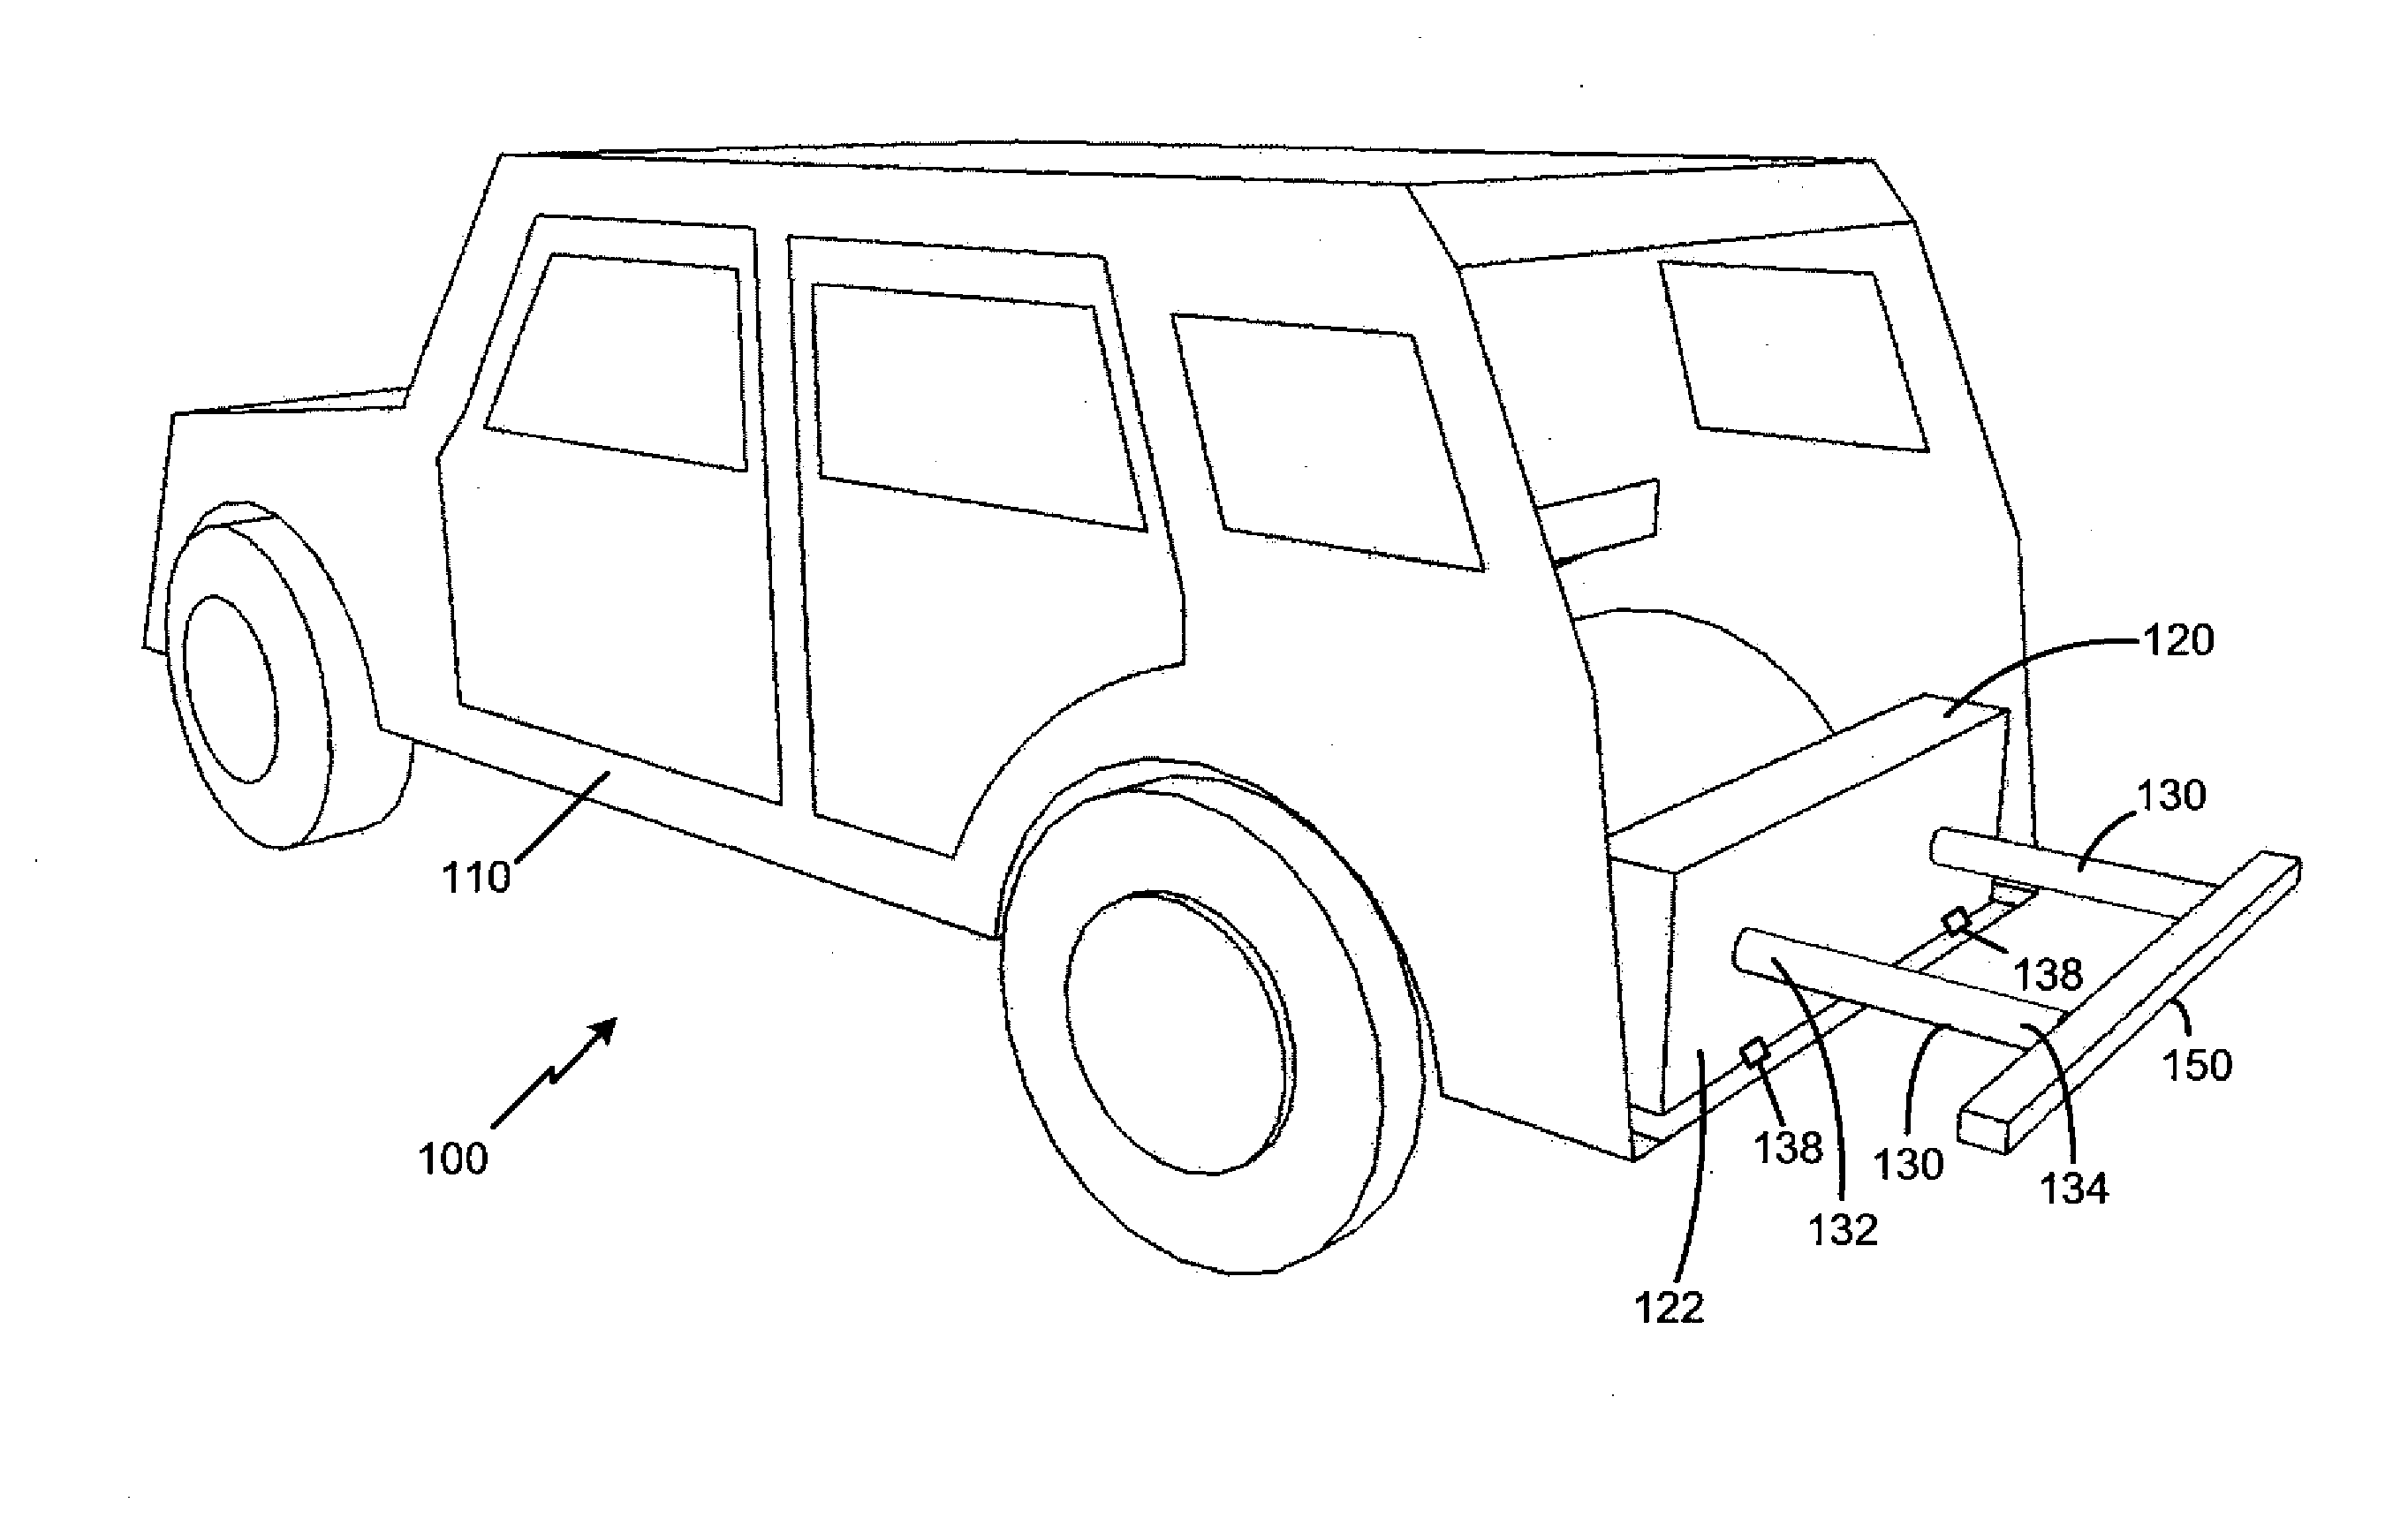 Method and Apparatus for an Attachable and Removable Crumple Zone